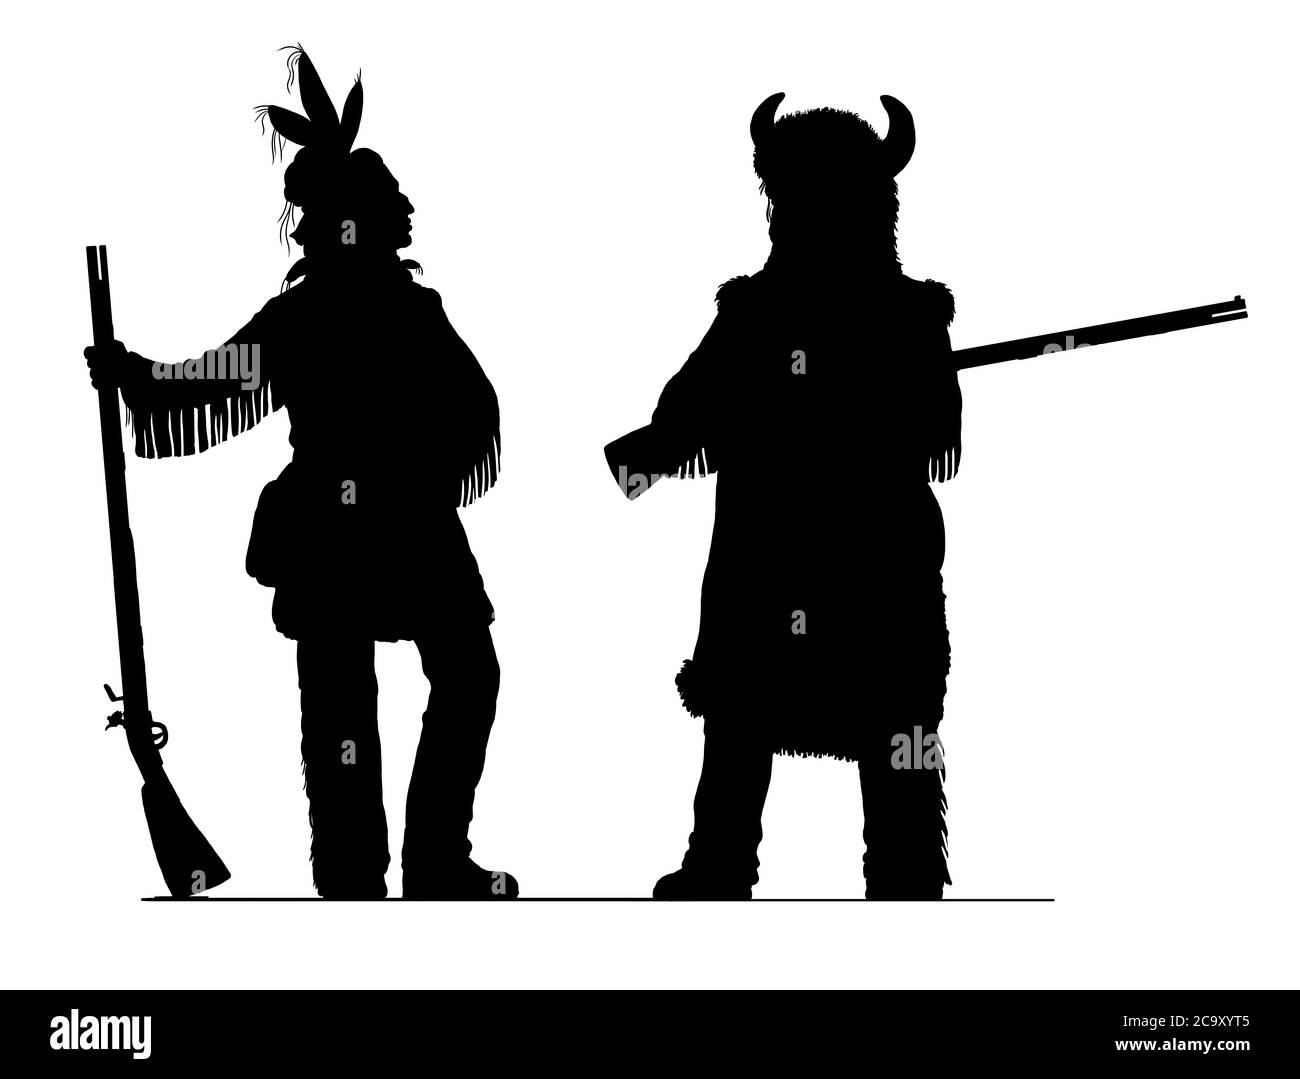 American Indians silhouette illustration. Native peoples of the Americas. Stock Photo